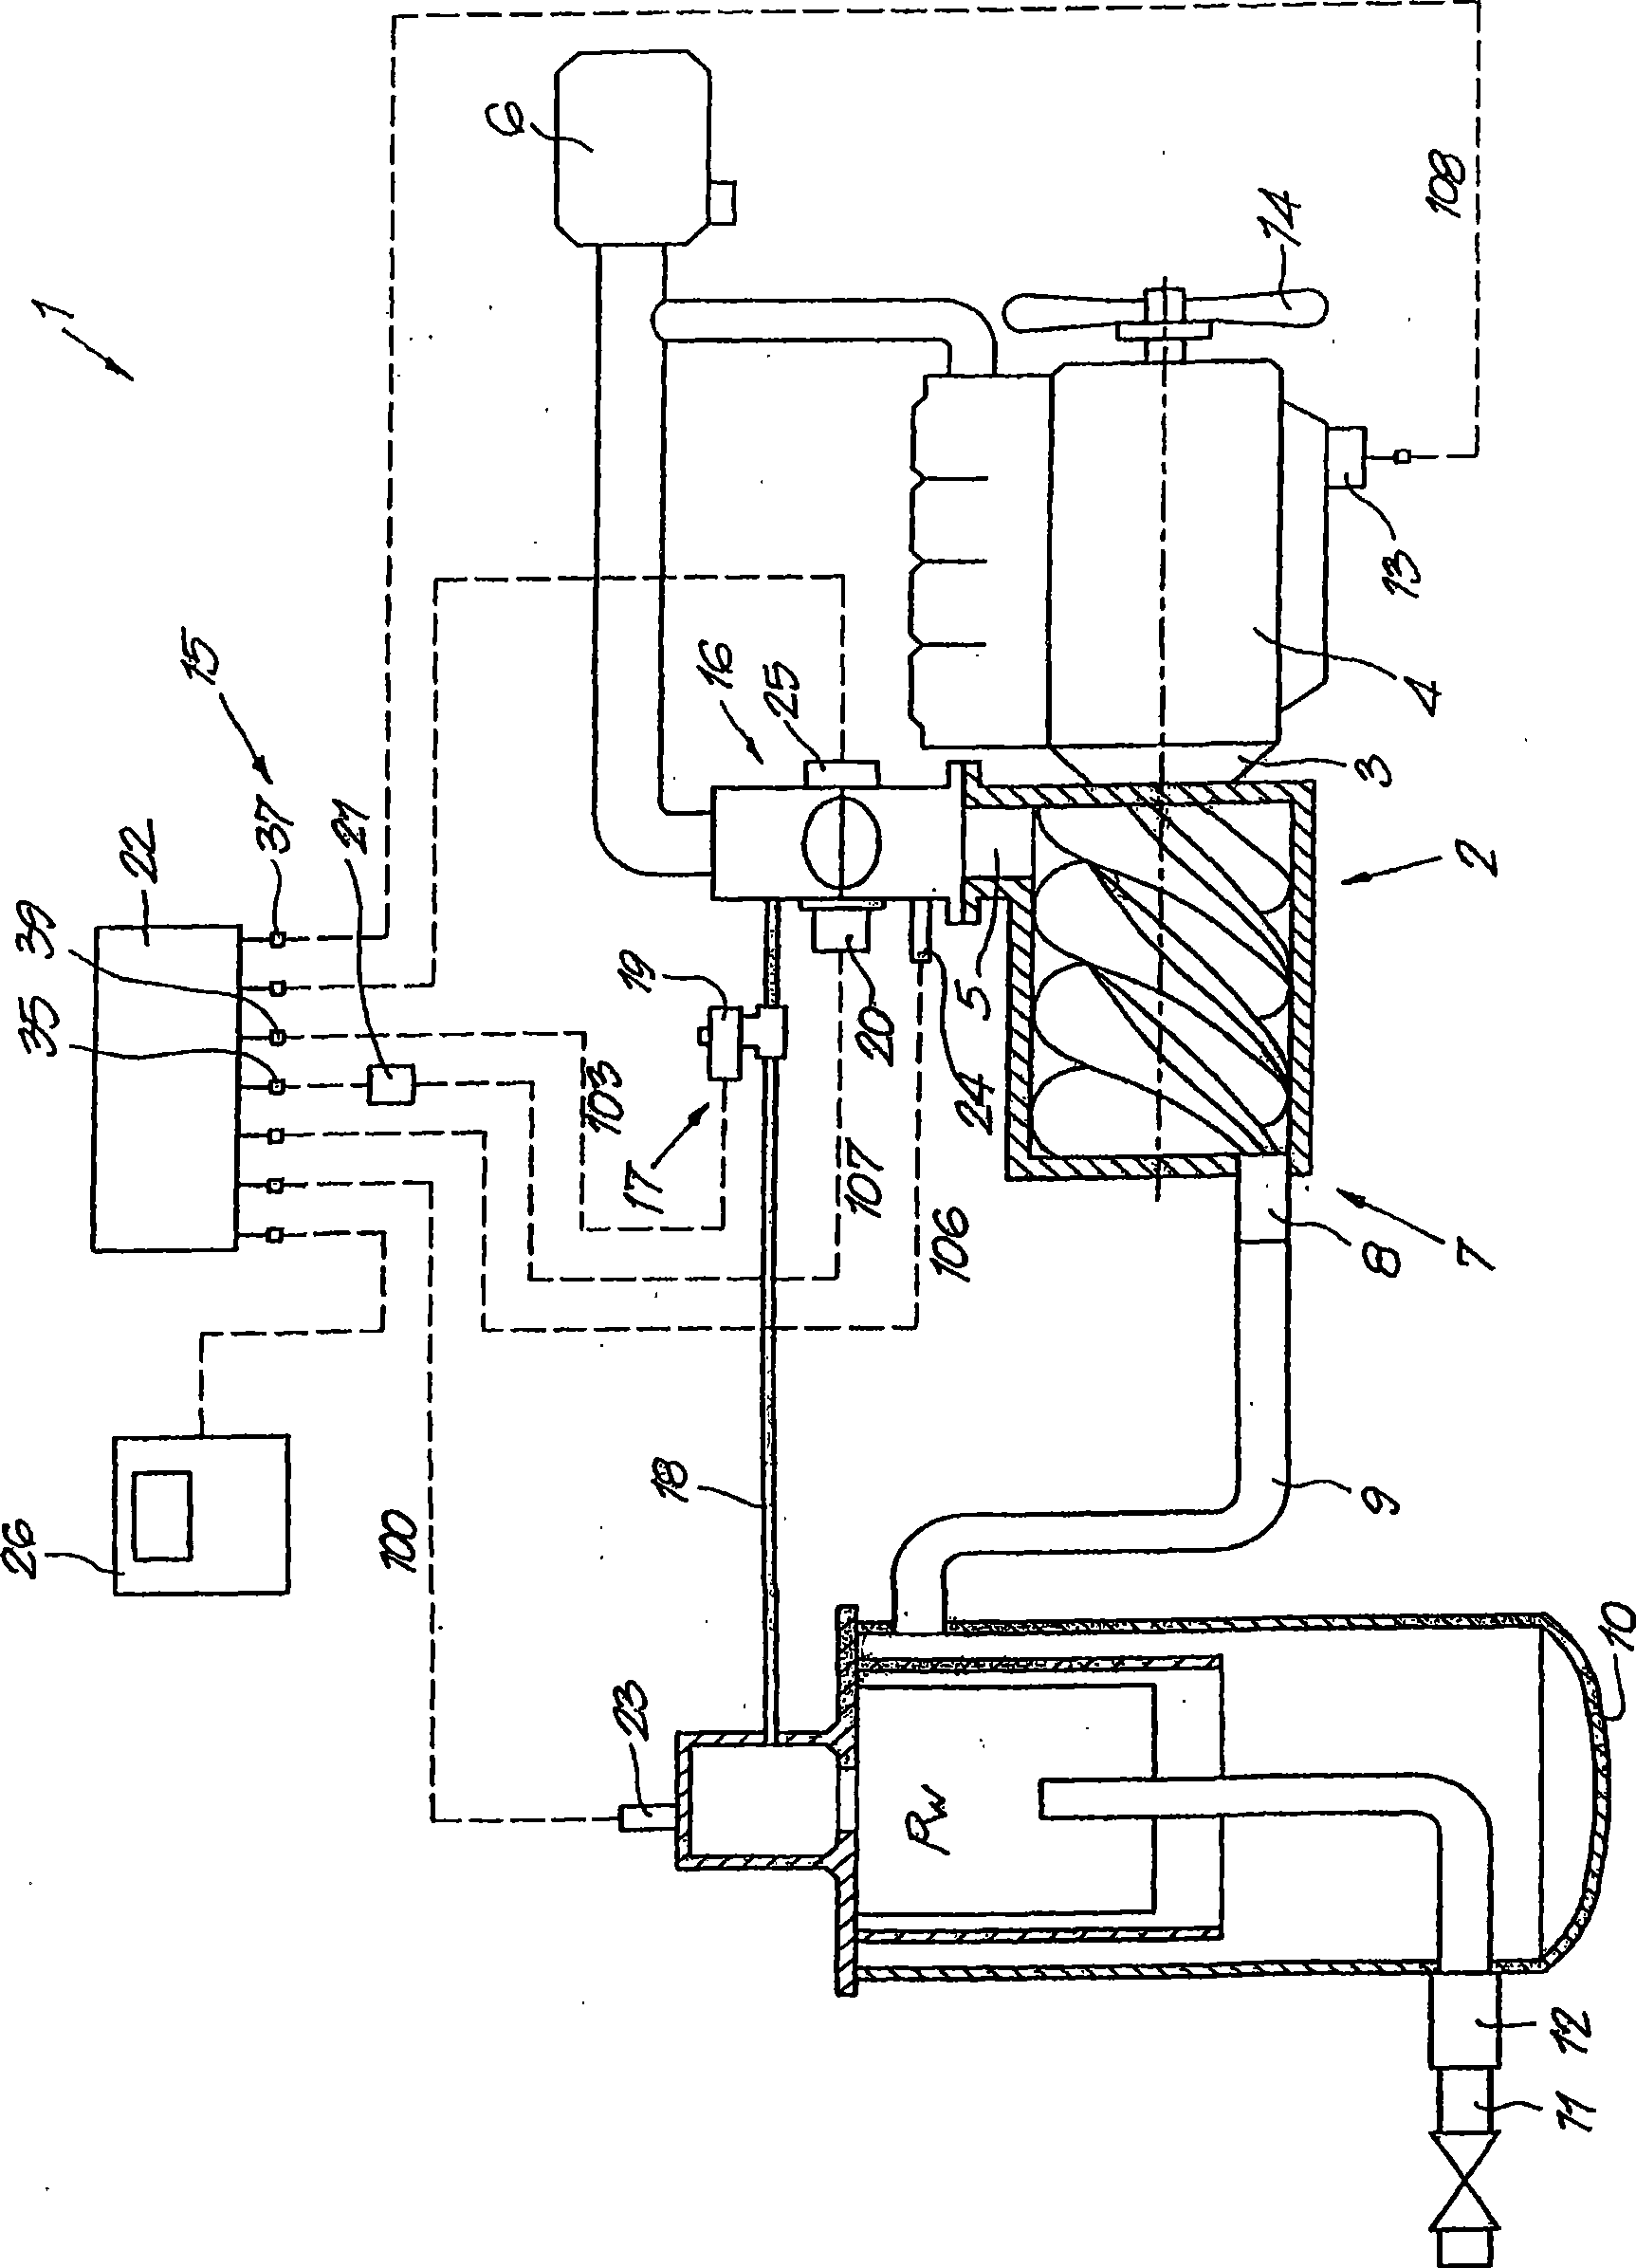 Device for regulating the operating pressure of an oil-injected compressor installation